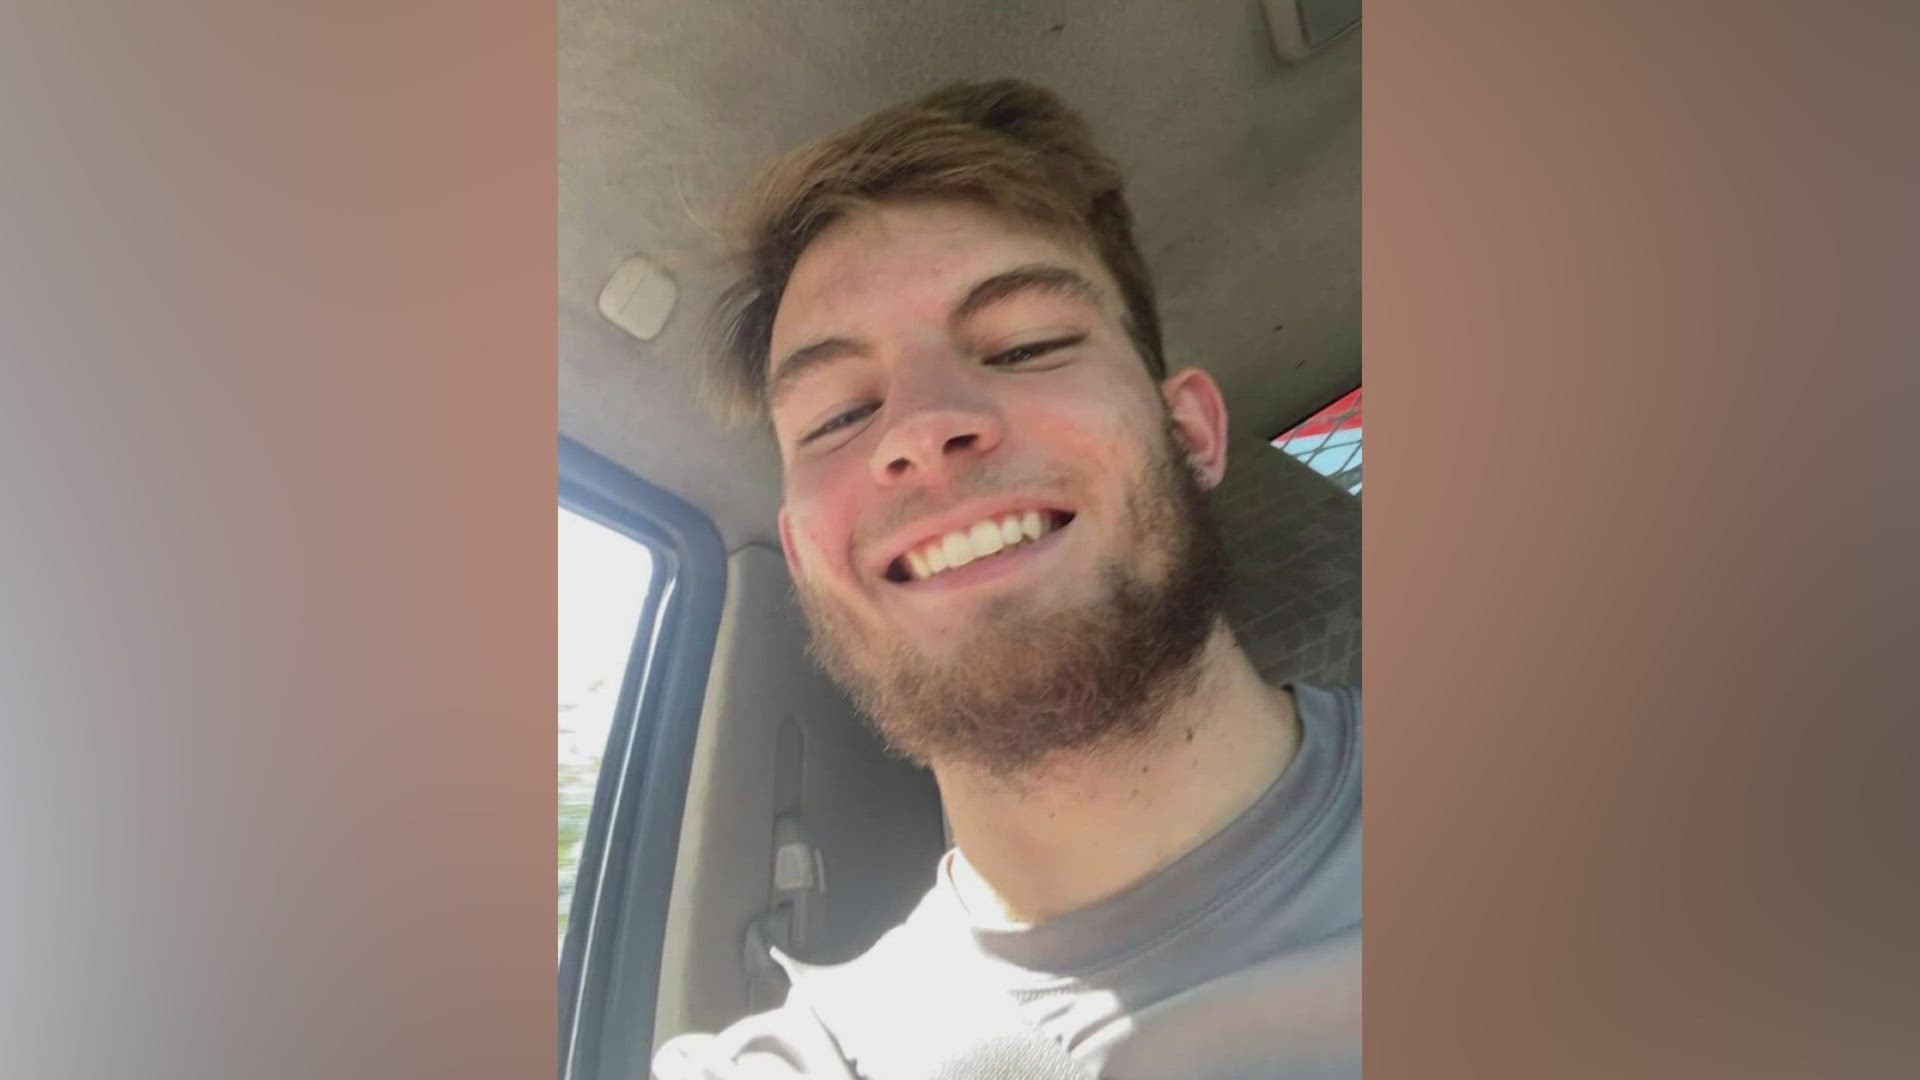 Officials have been looking for a missing 22-year-old man, who went missing Sunday.